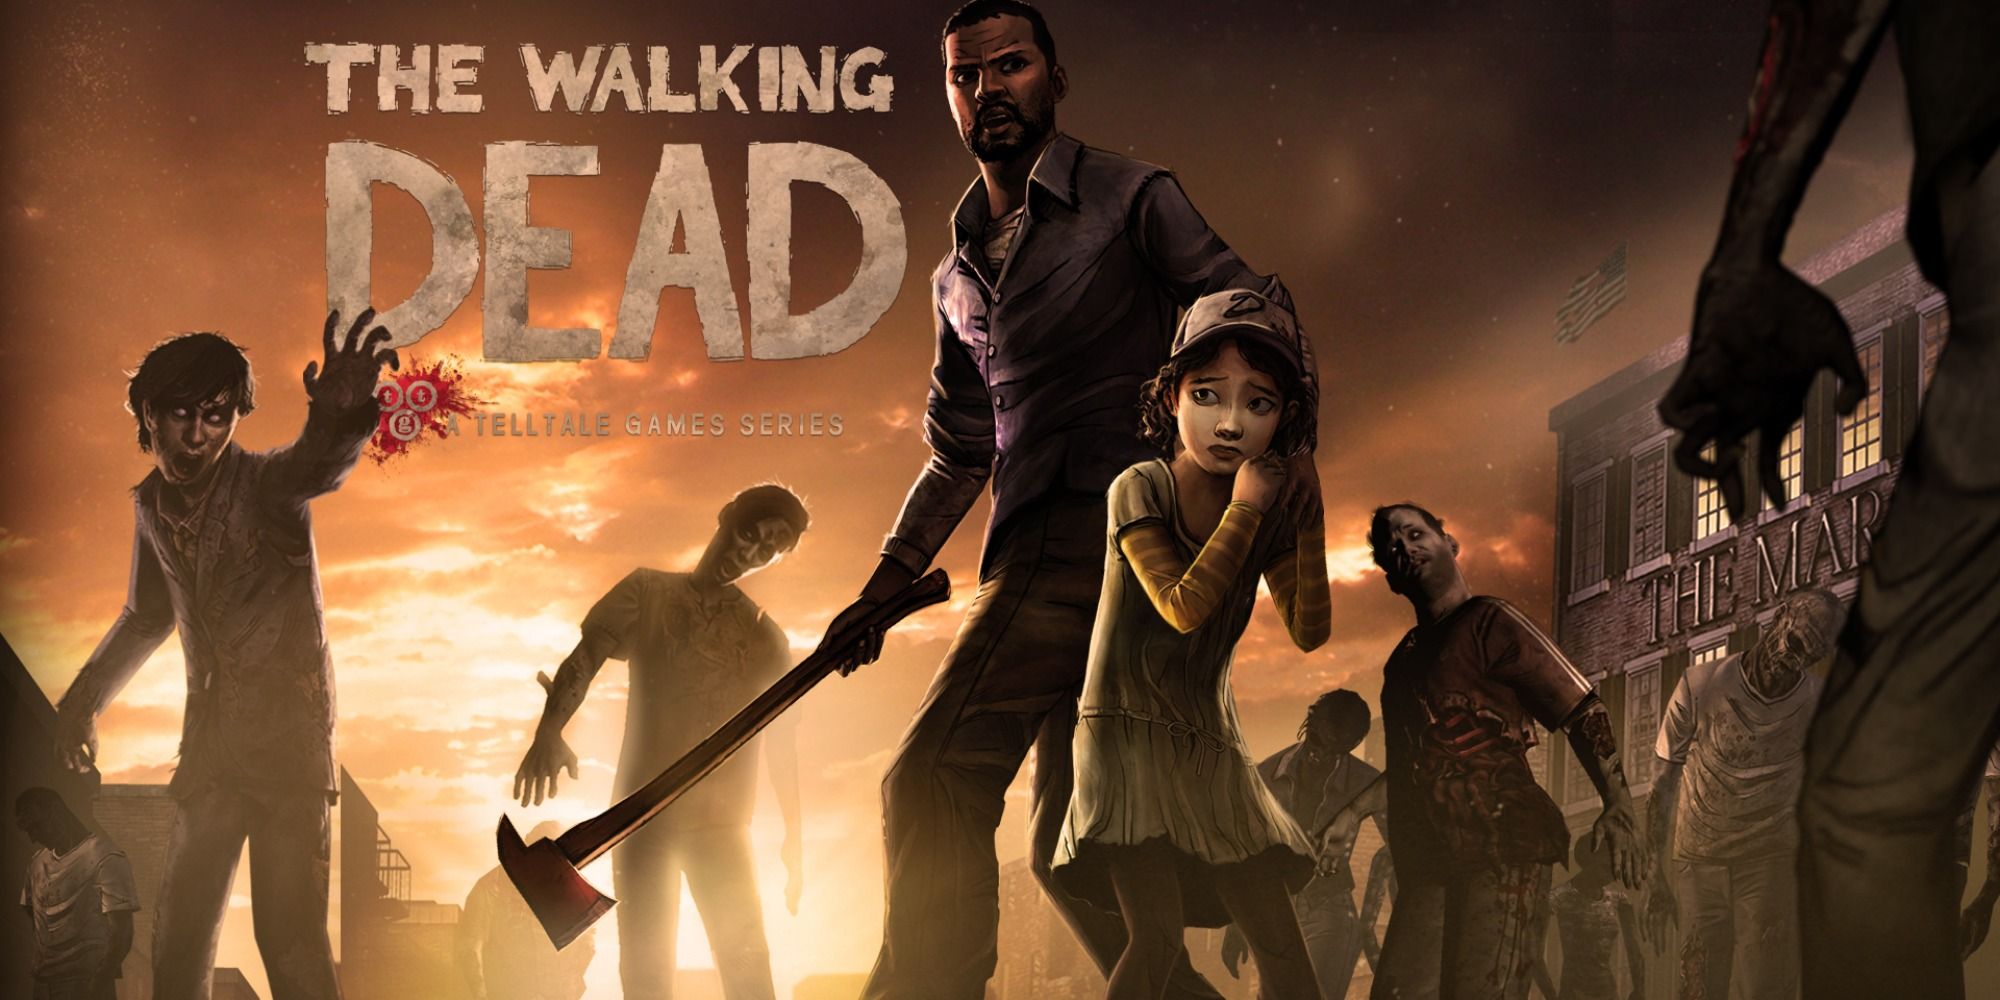 The Walking Dead - Lee Stands Wielding An Ax Behind A Fearful Clementine, While Zombies Surround Them